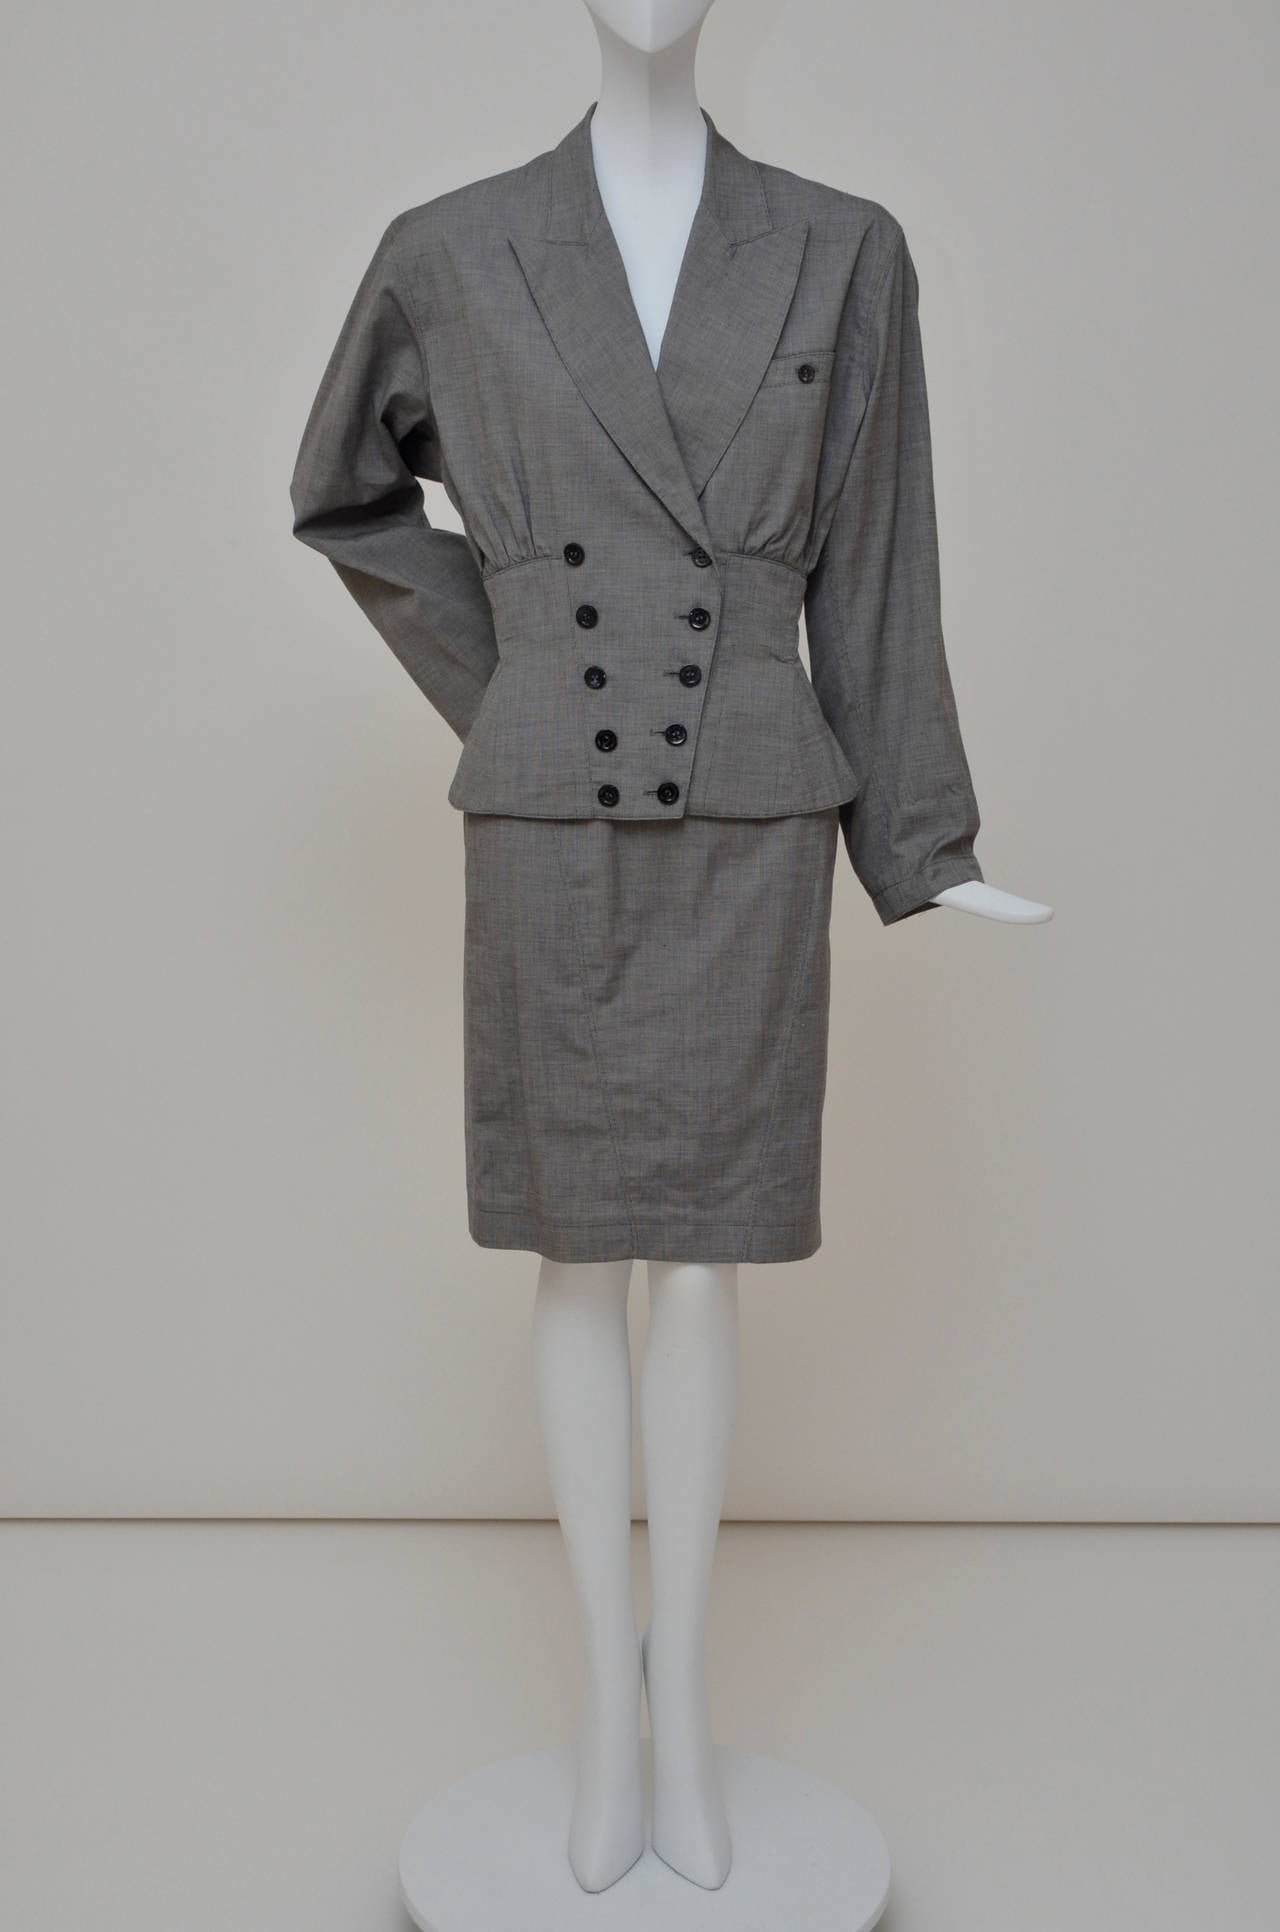 Azzedine Alaia early  beautiful vintage suit.
Size  8.(run small).
Condition:Like new mint.
This suit characterize  and represent Alaia unique style and cut.
Fabric 100% cotton.

FINAL SALE.